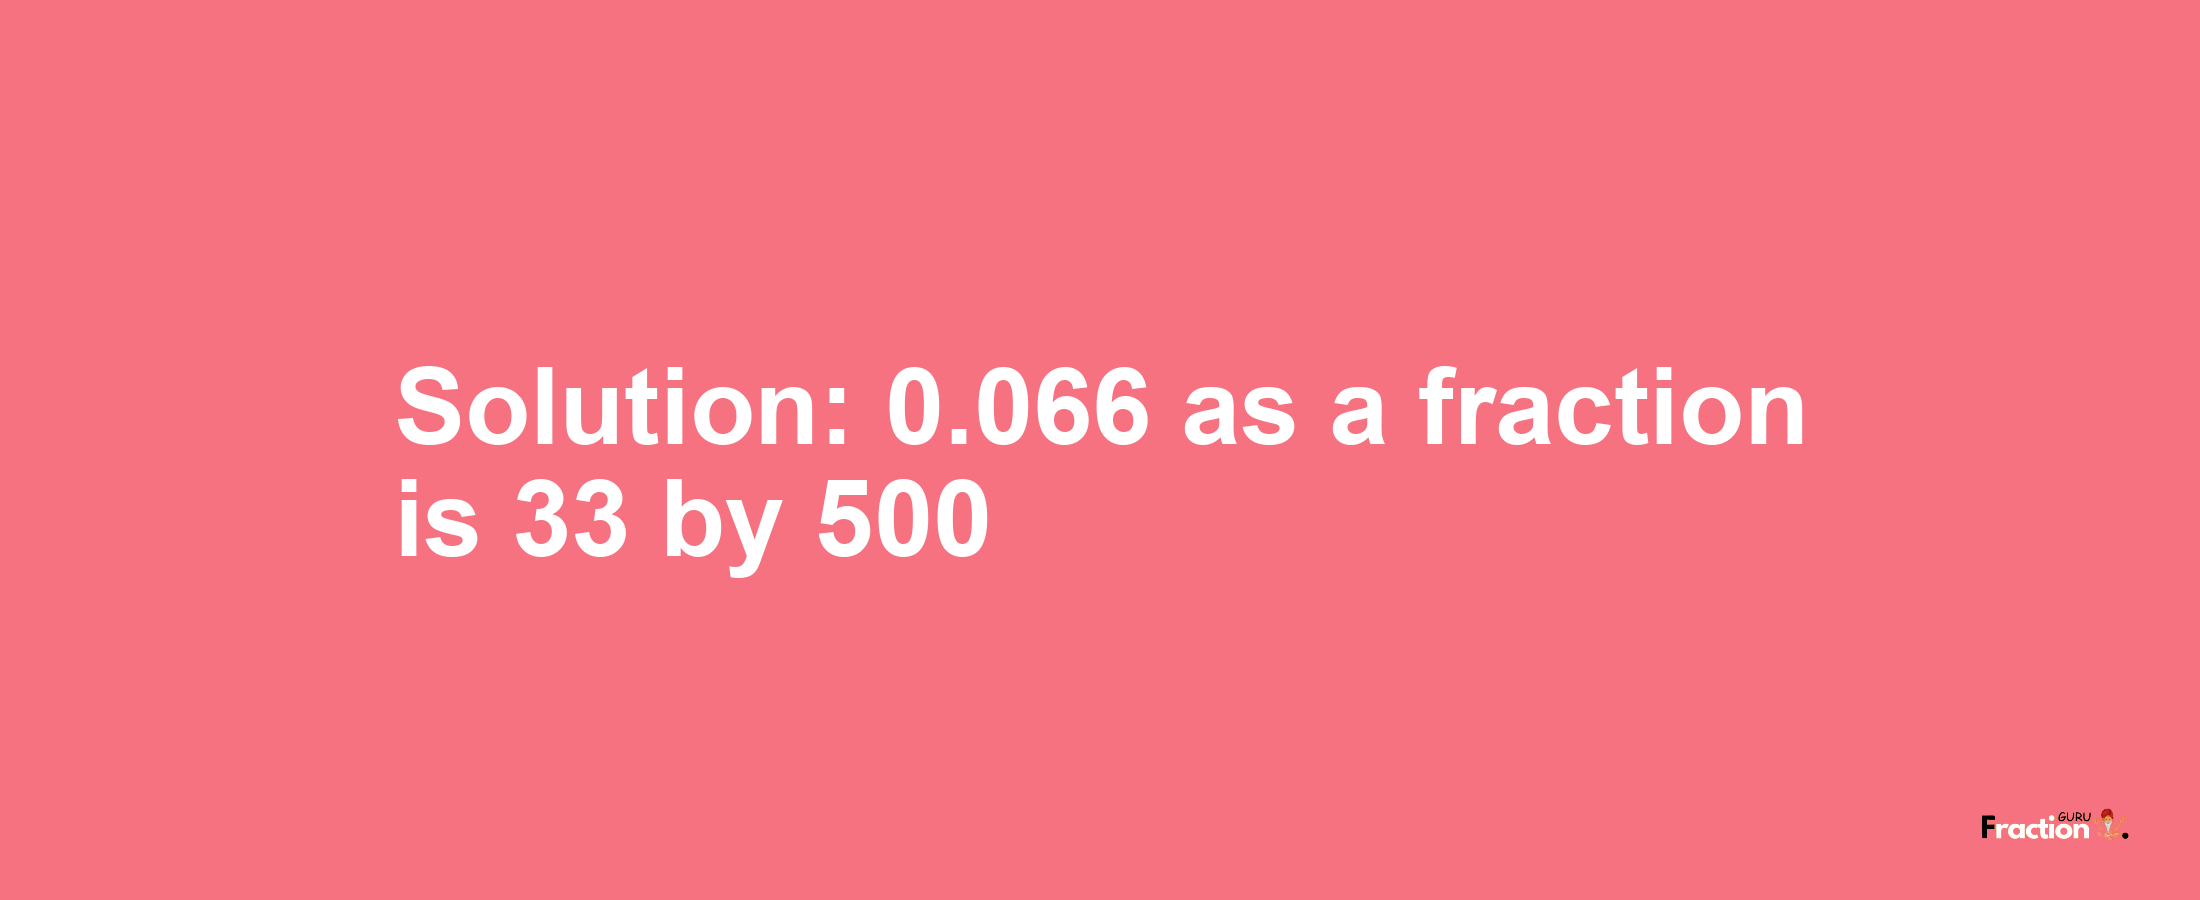 Solution:0.066 as a fraction is 33/500